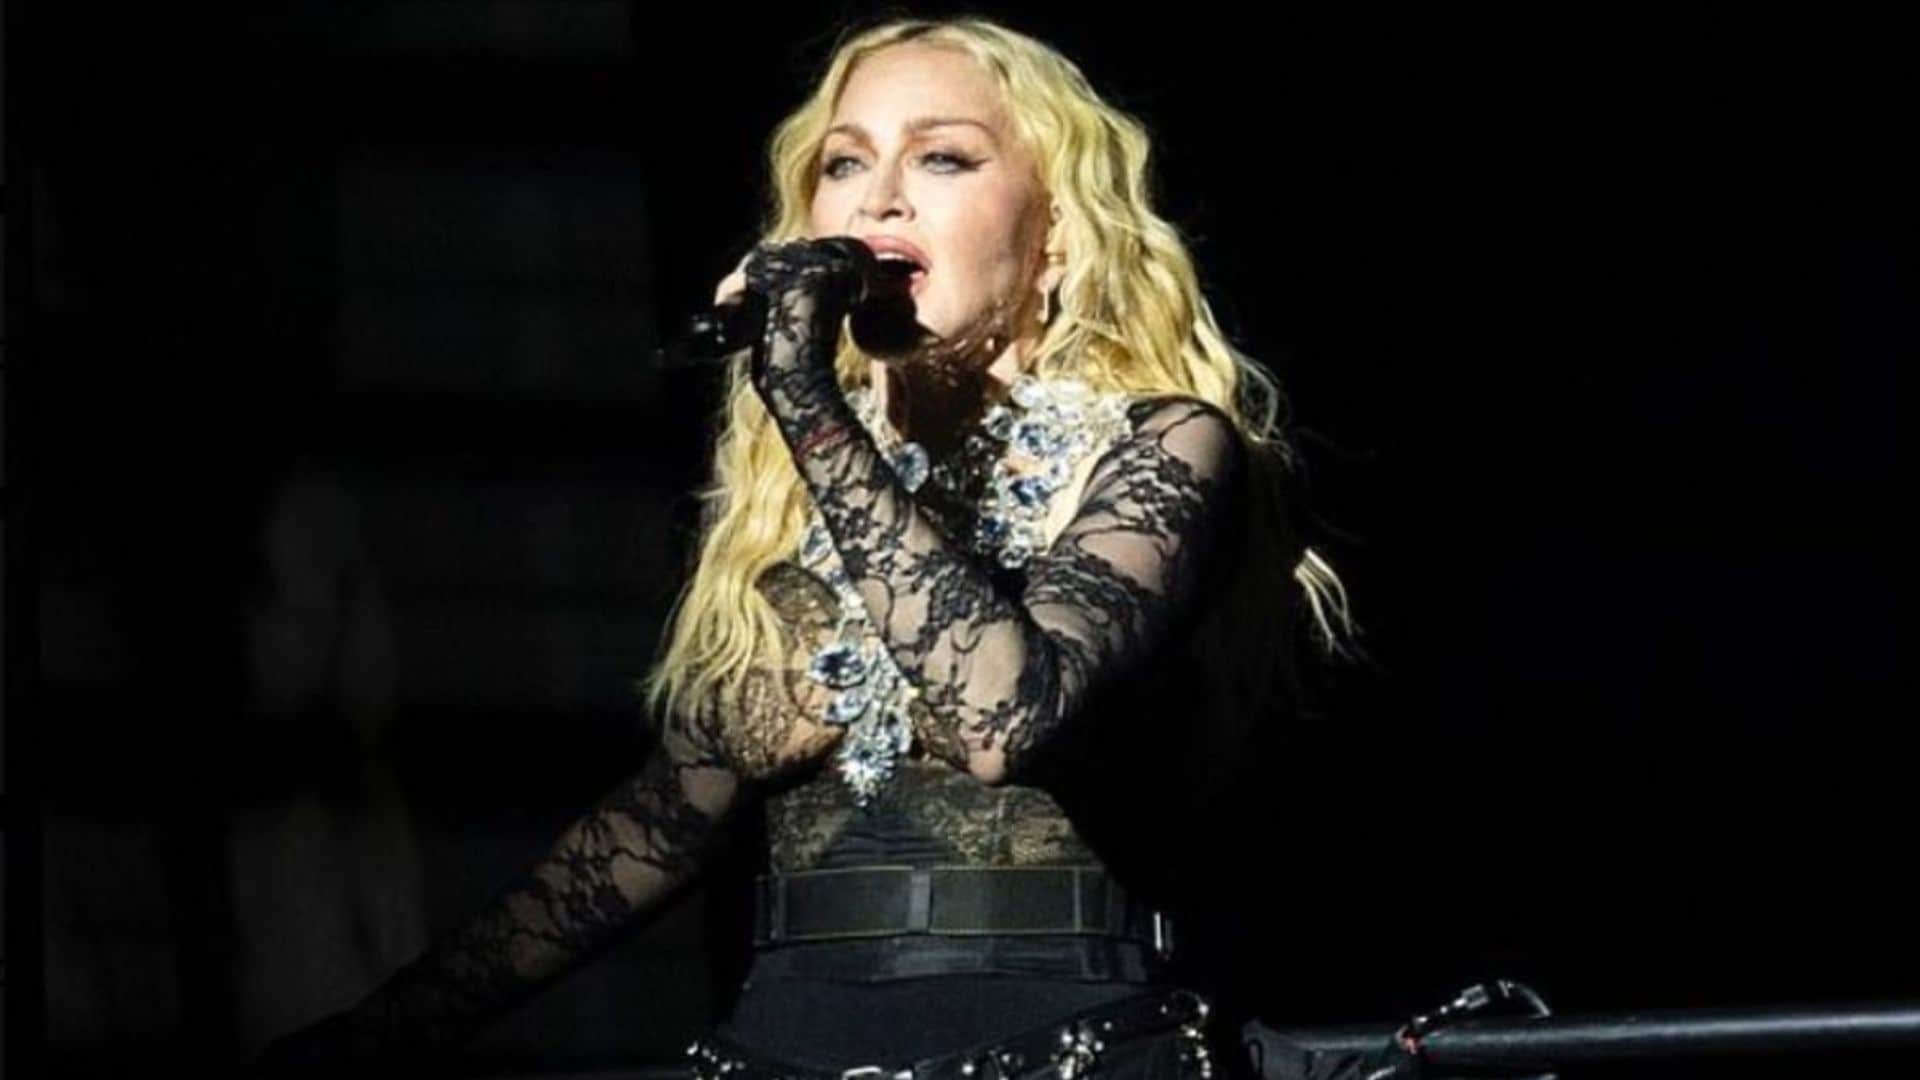 Madonna brings daughters Lourdes, Mercy, and Estere to the stage on Celebration Tour concert